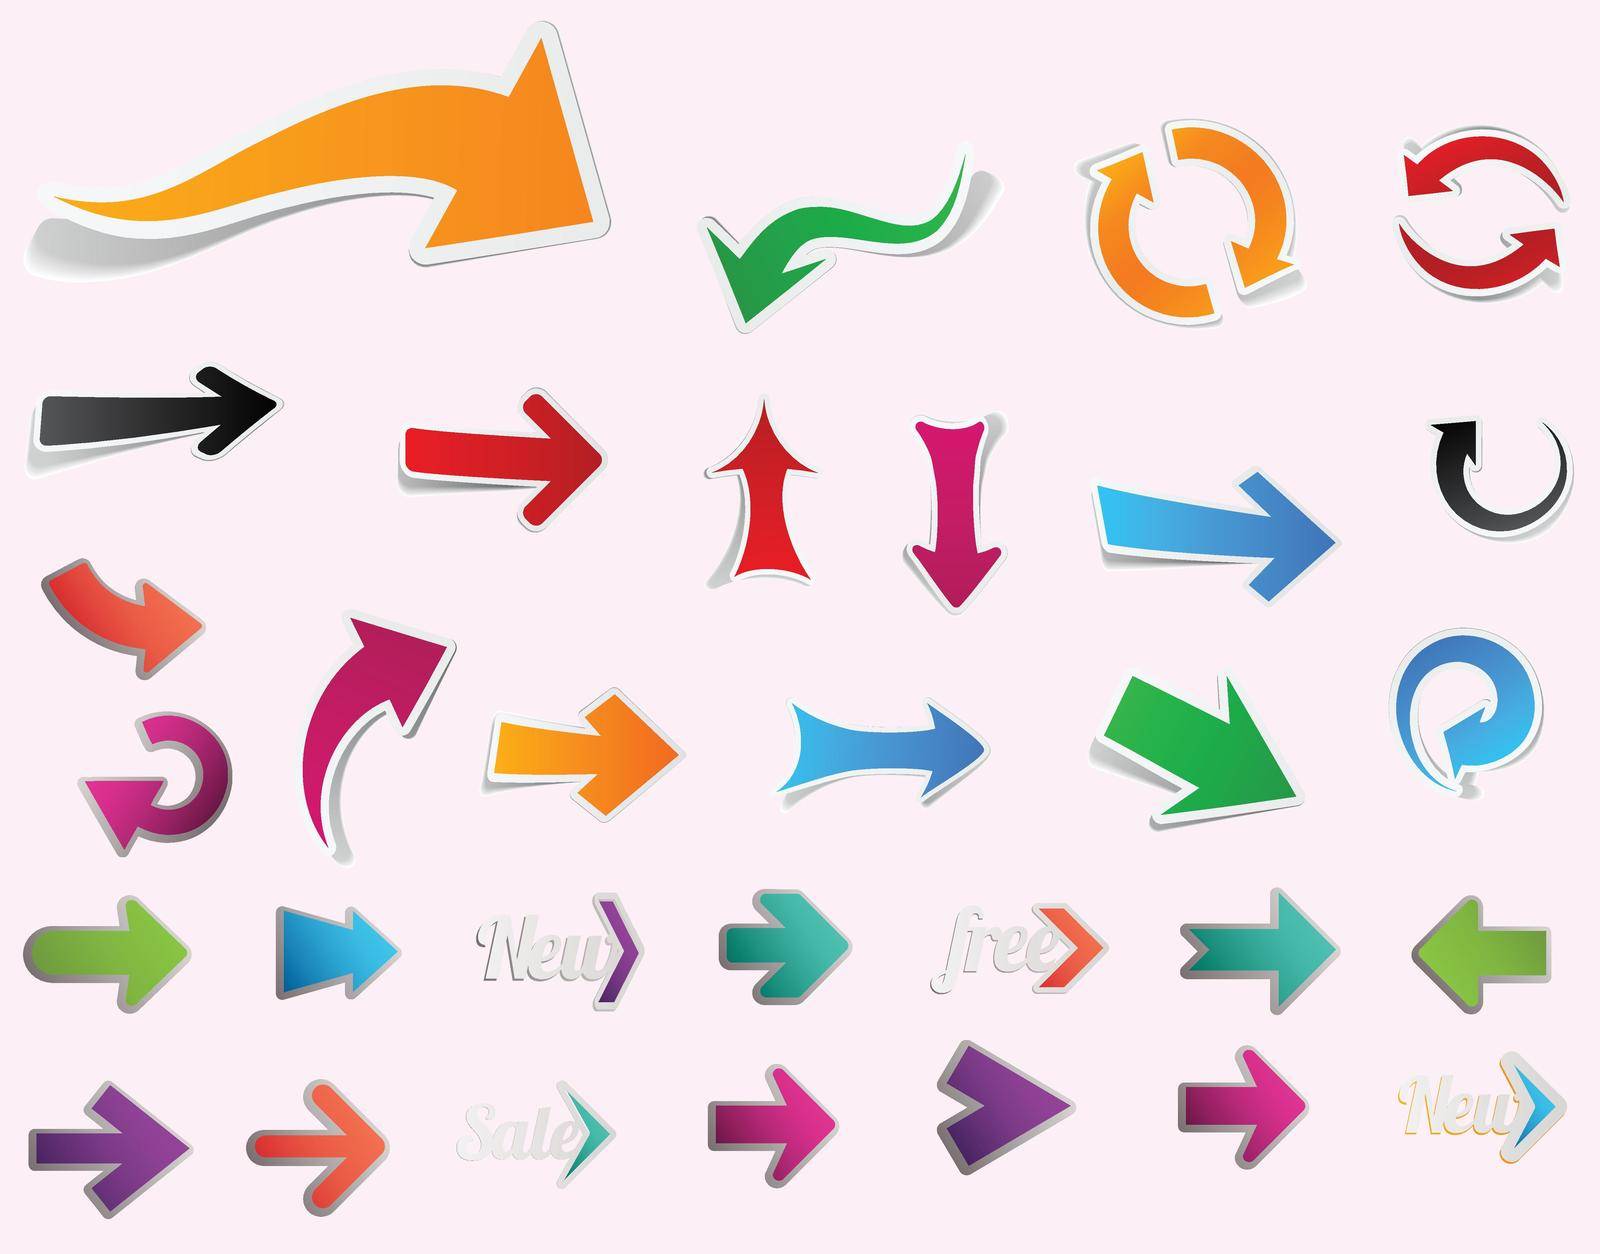 you can use arrow stickers shiny vector  to design banners, posters, backgrounds,..etc.